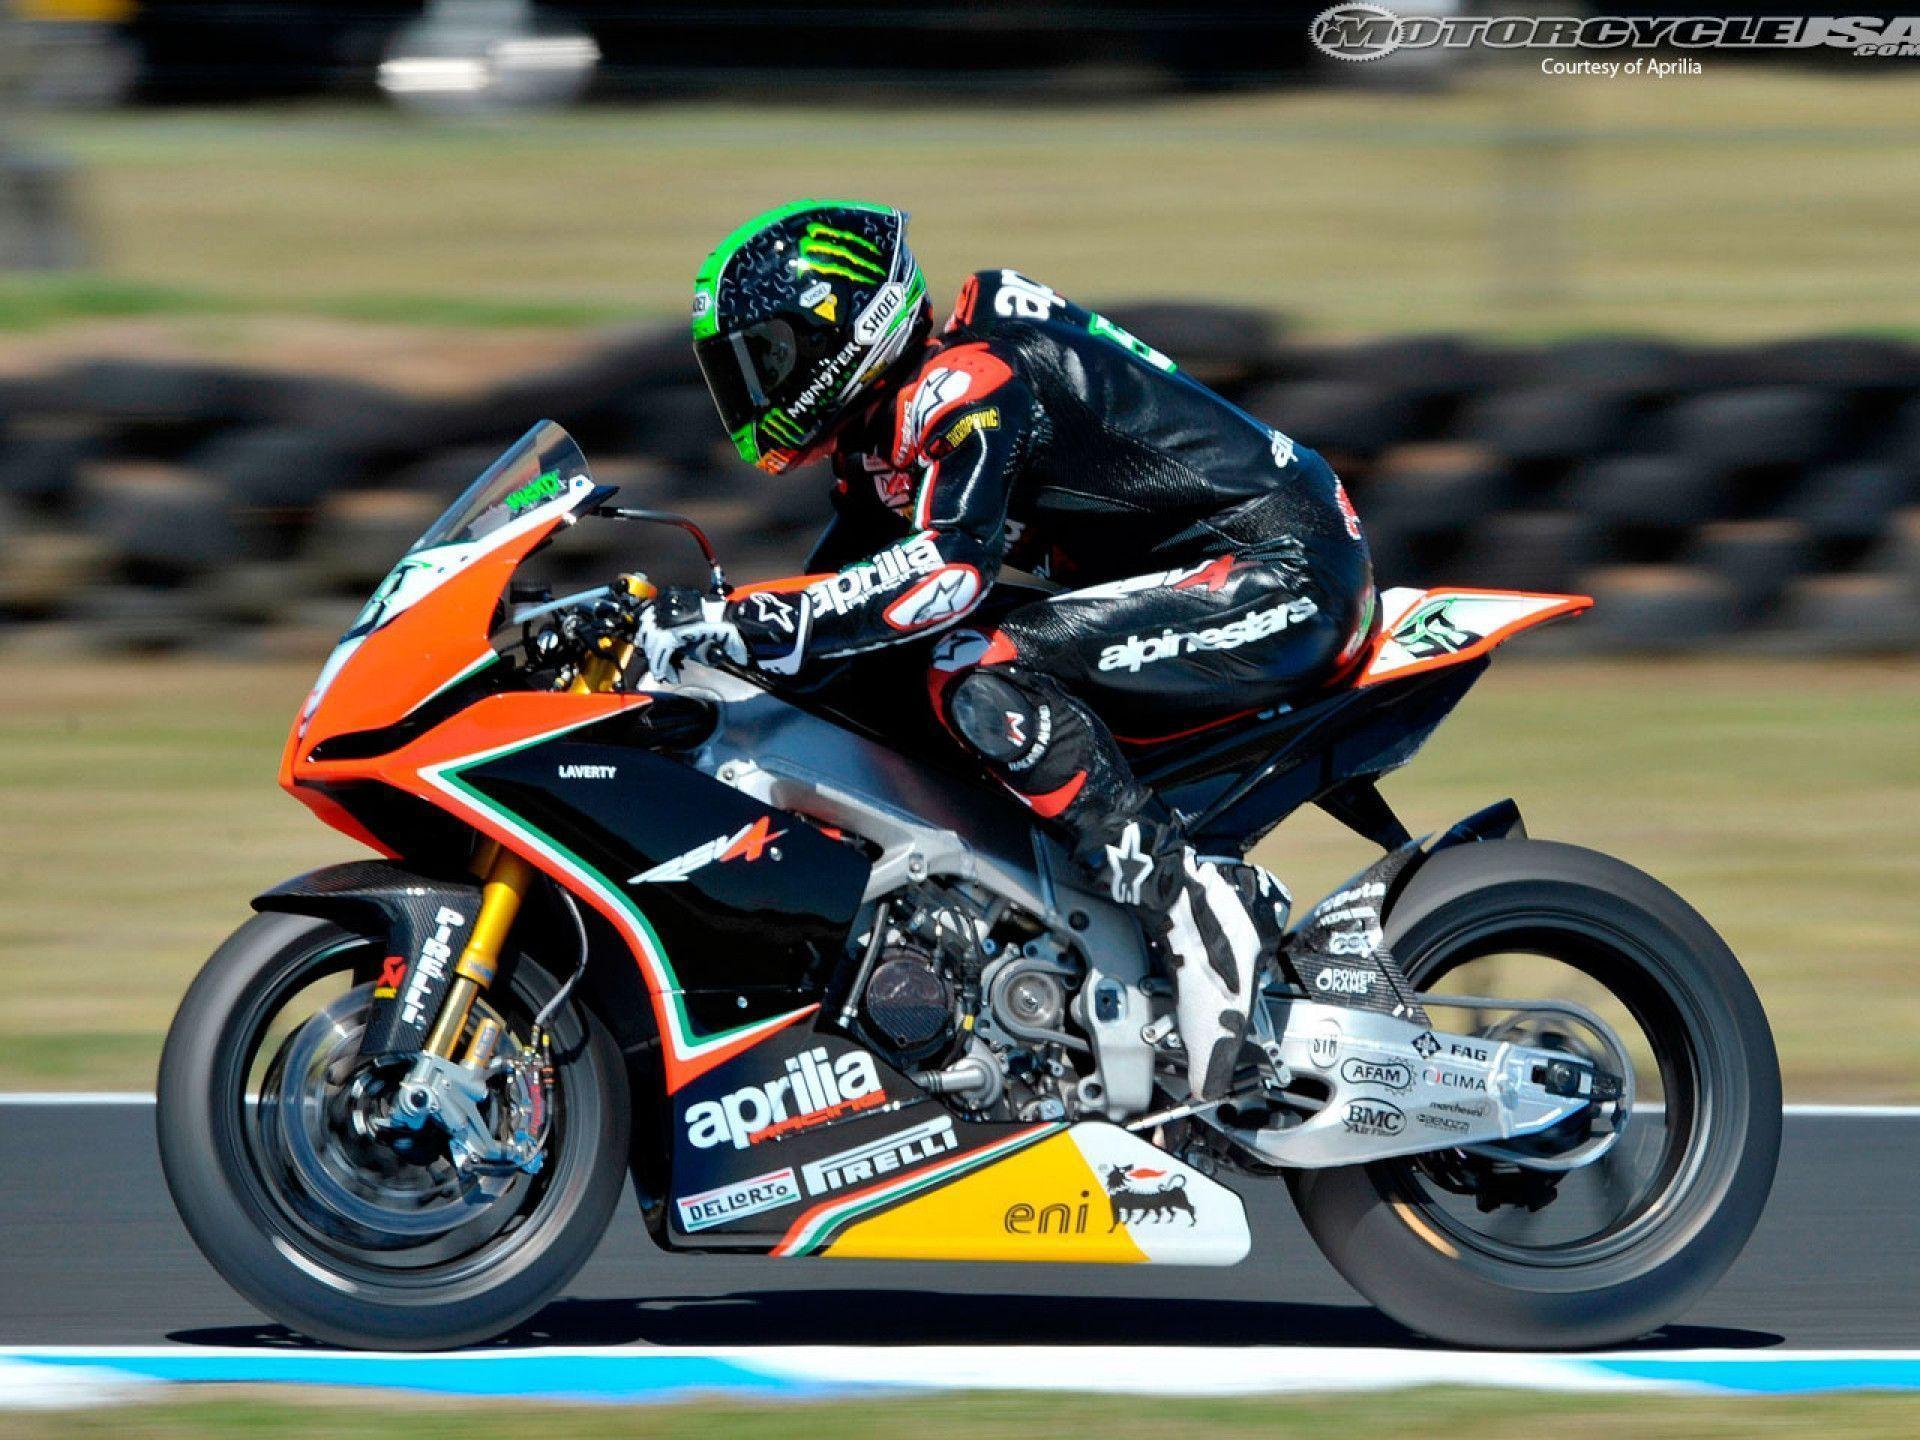 World superbike phillip island picture 12 of 36 motorcycle usa